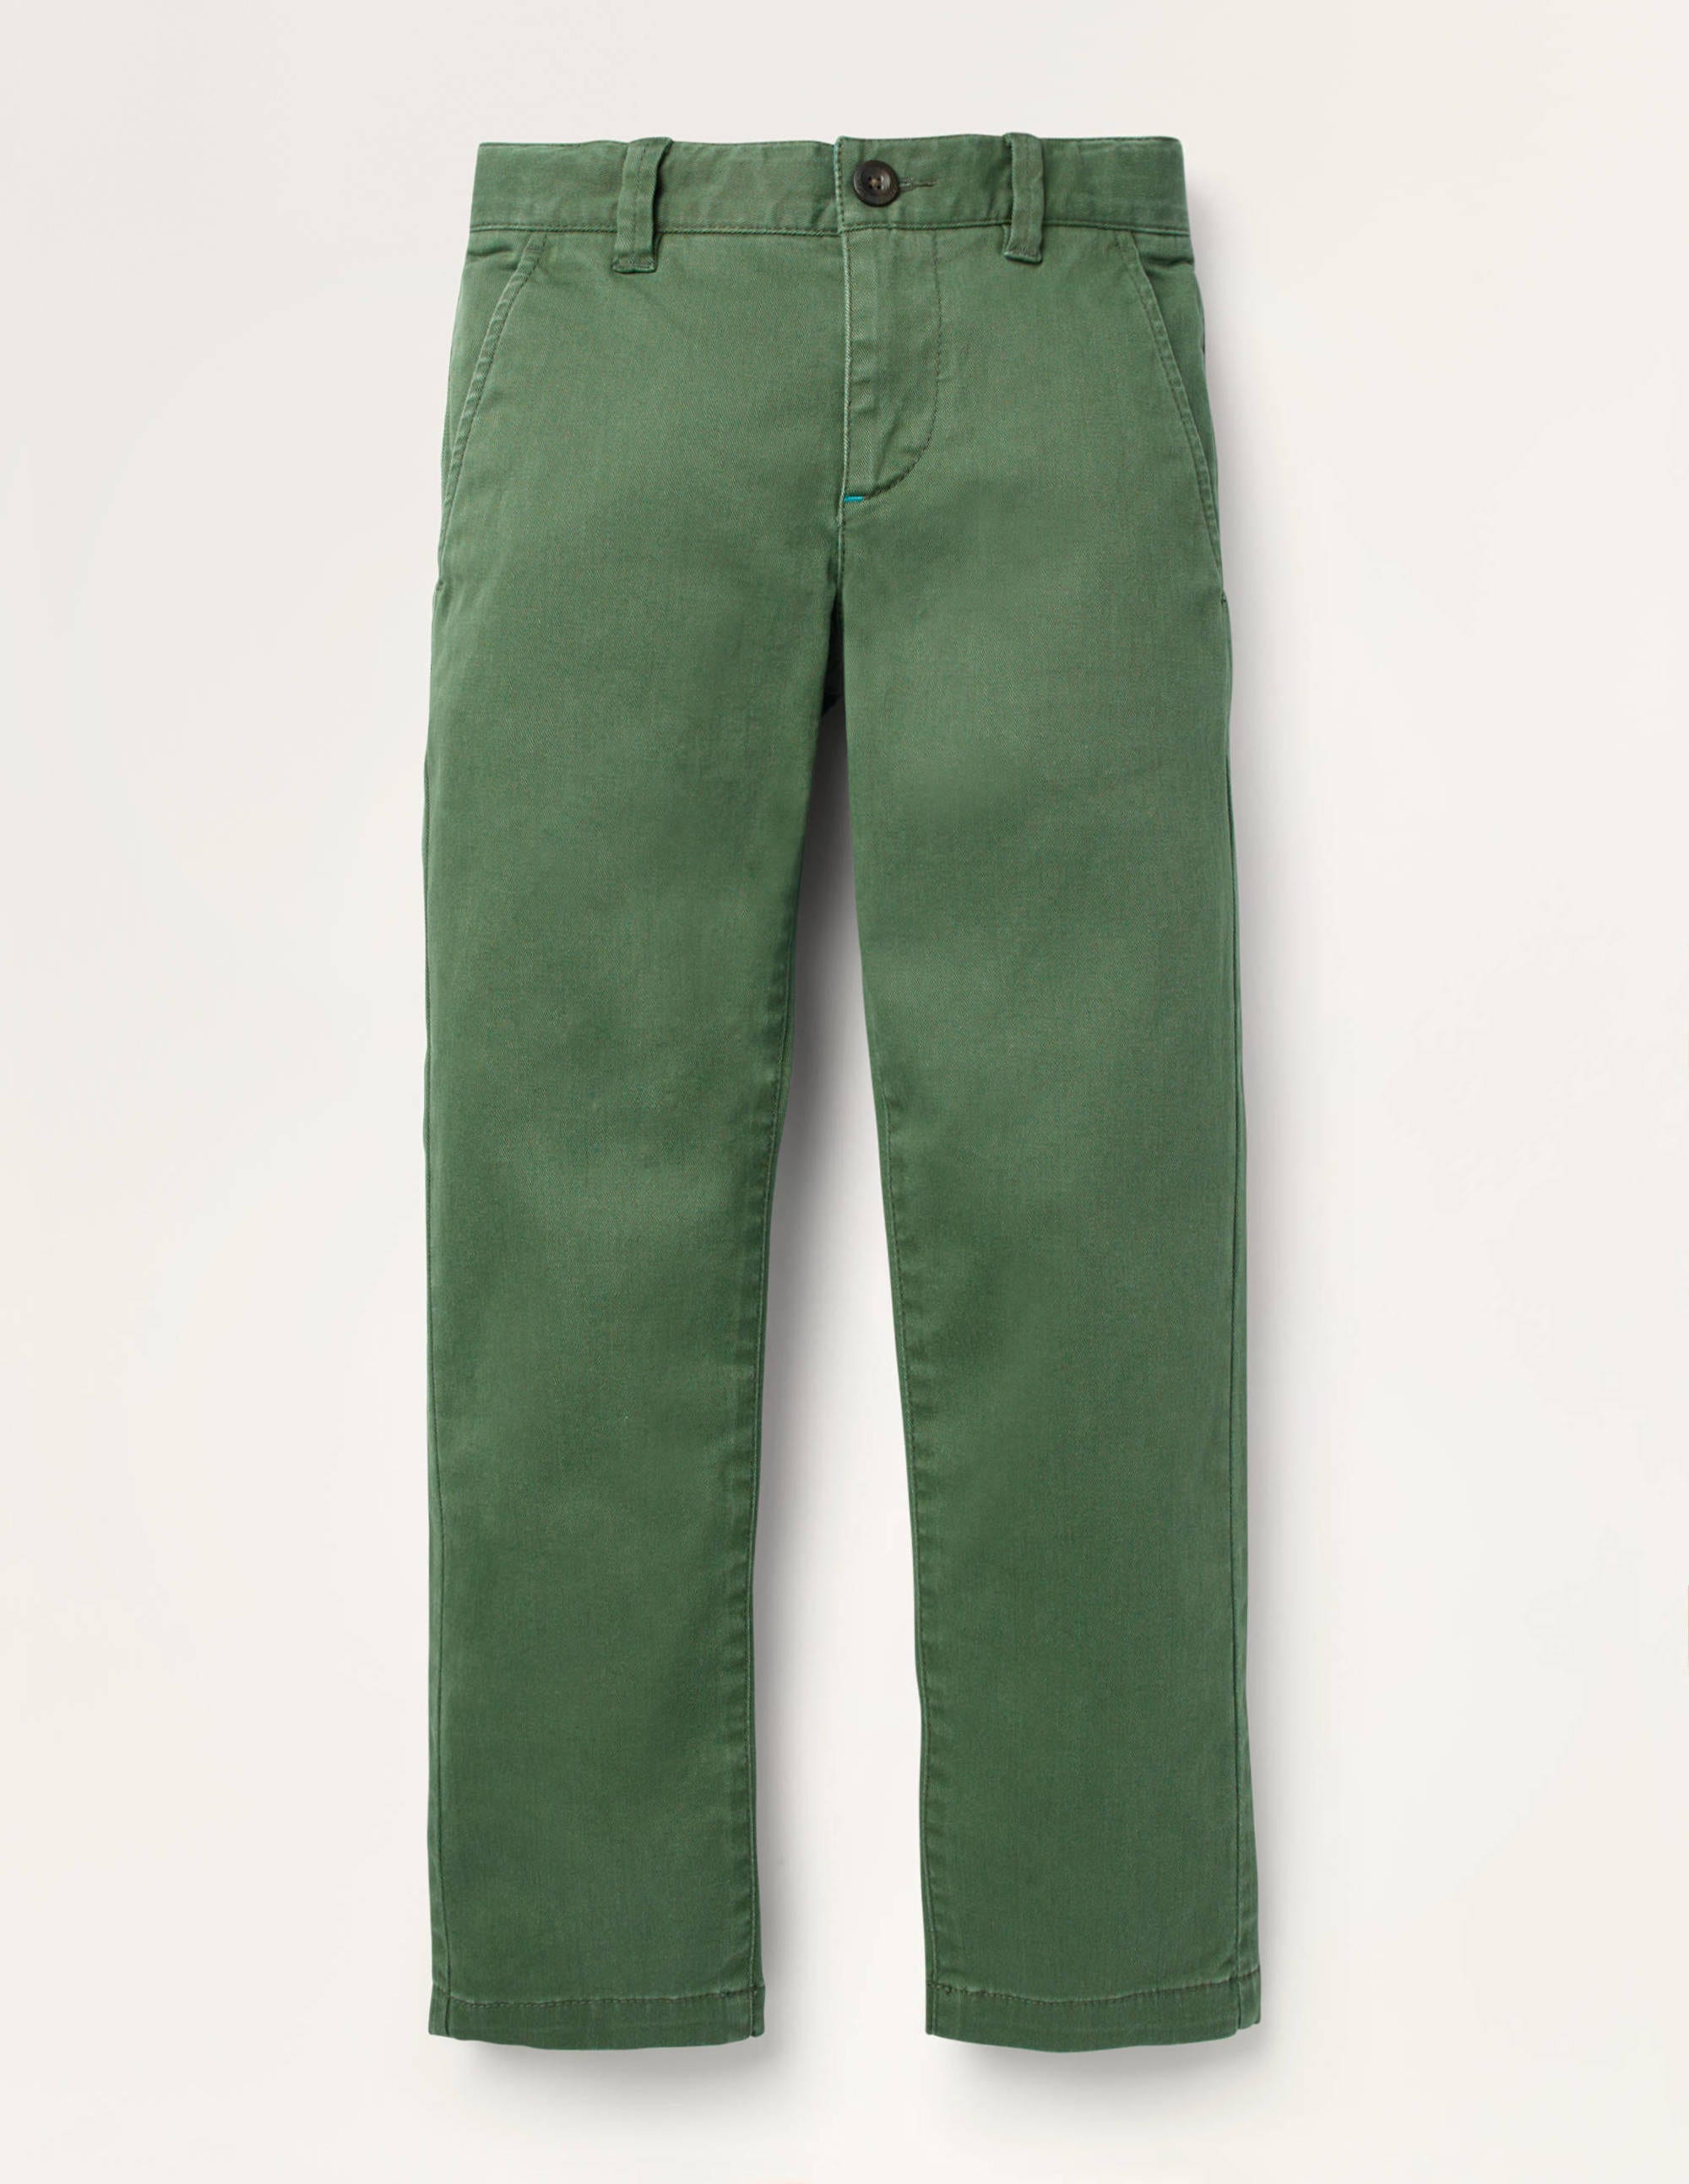 Chino Stretch Trousers - Rosemary Green | Boden UK